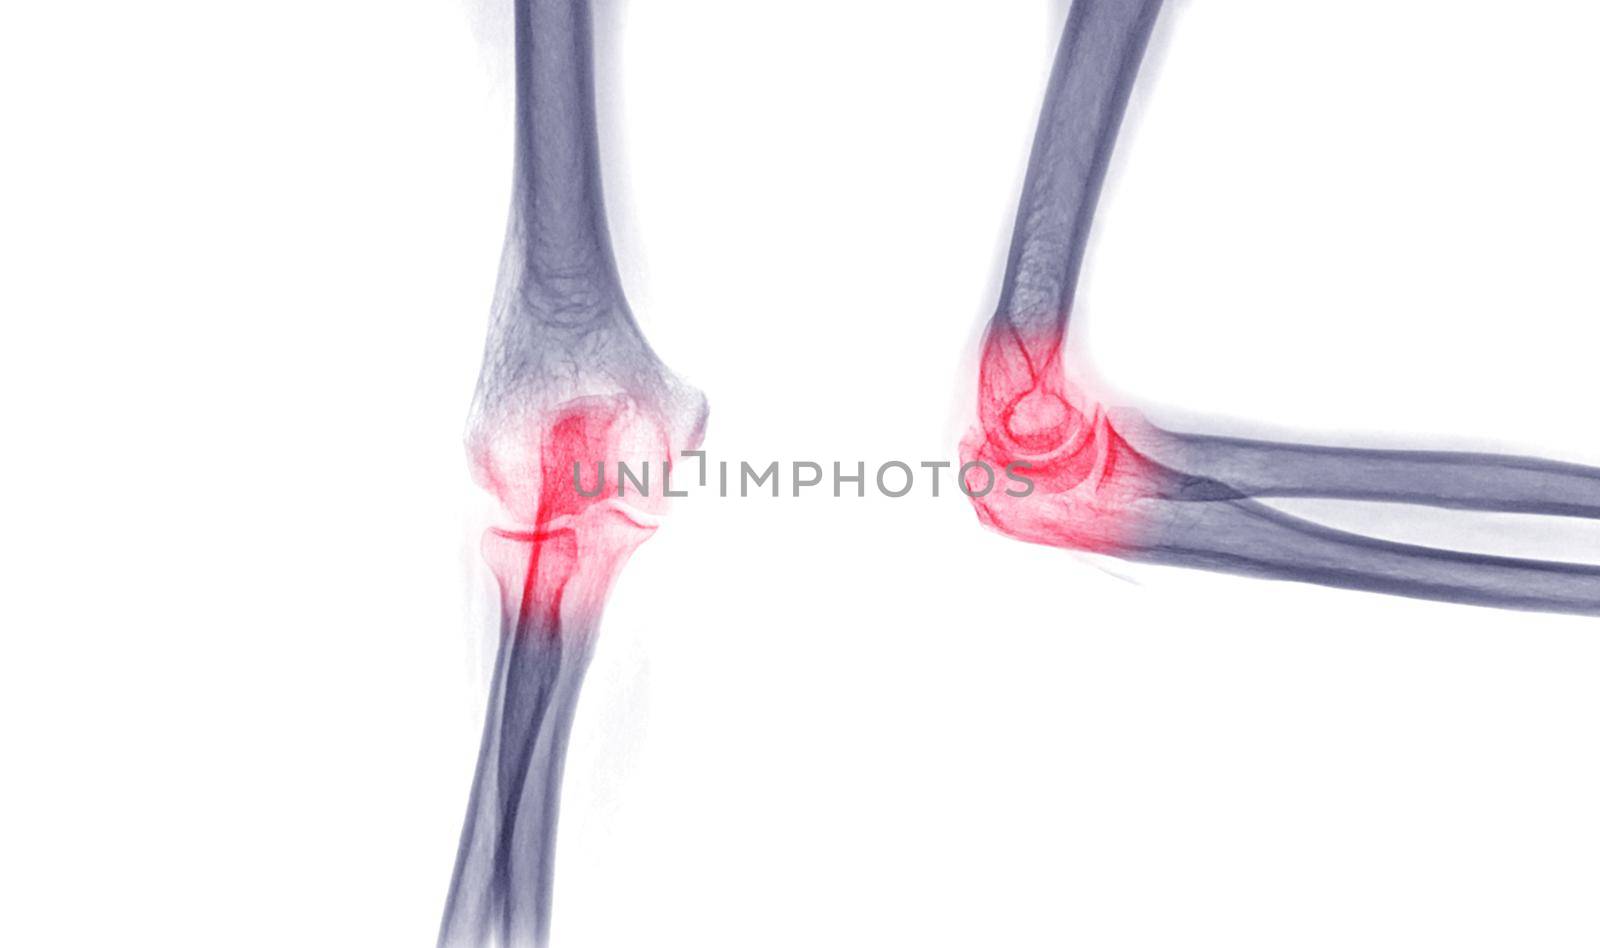 X-ray Elbow or Radiography of Right elbow AP and Lateral view for diagnostic fracture of elbow.